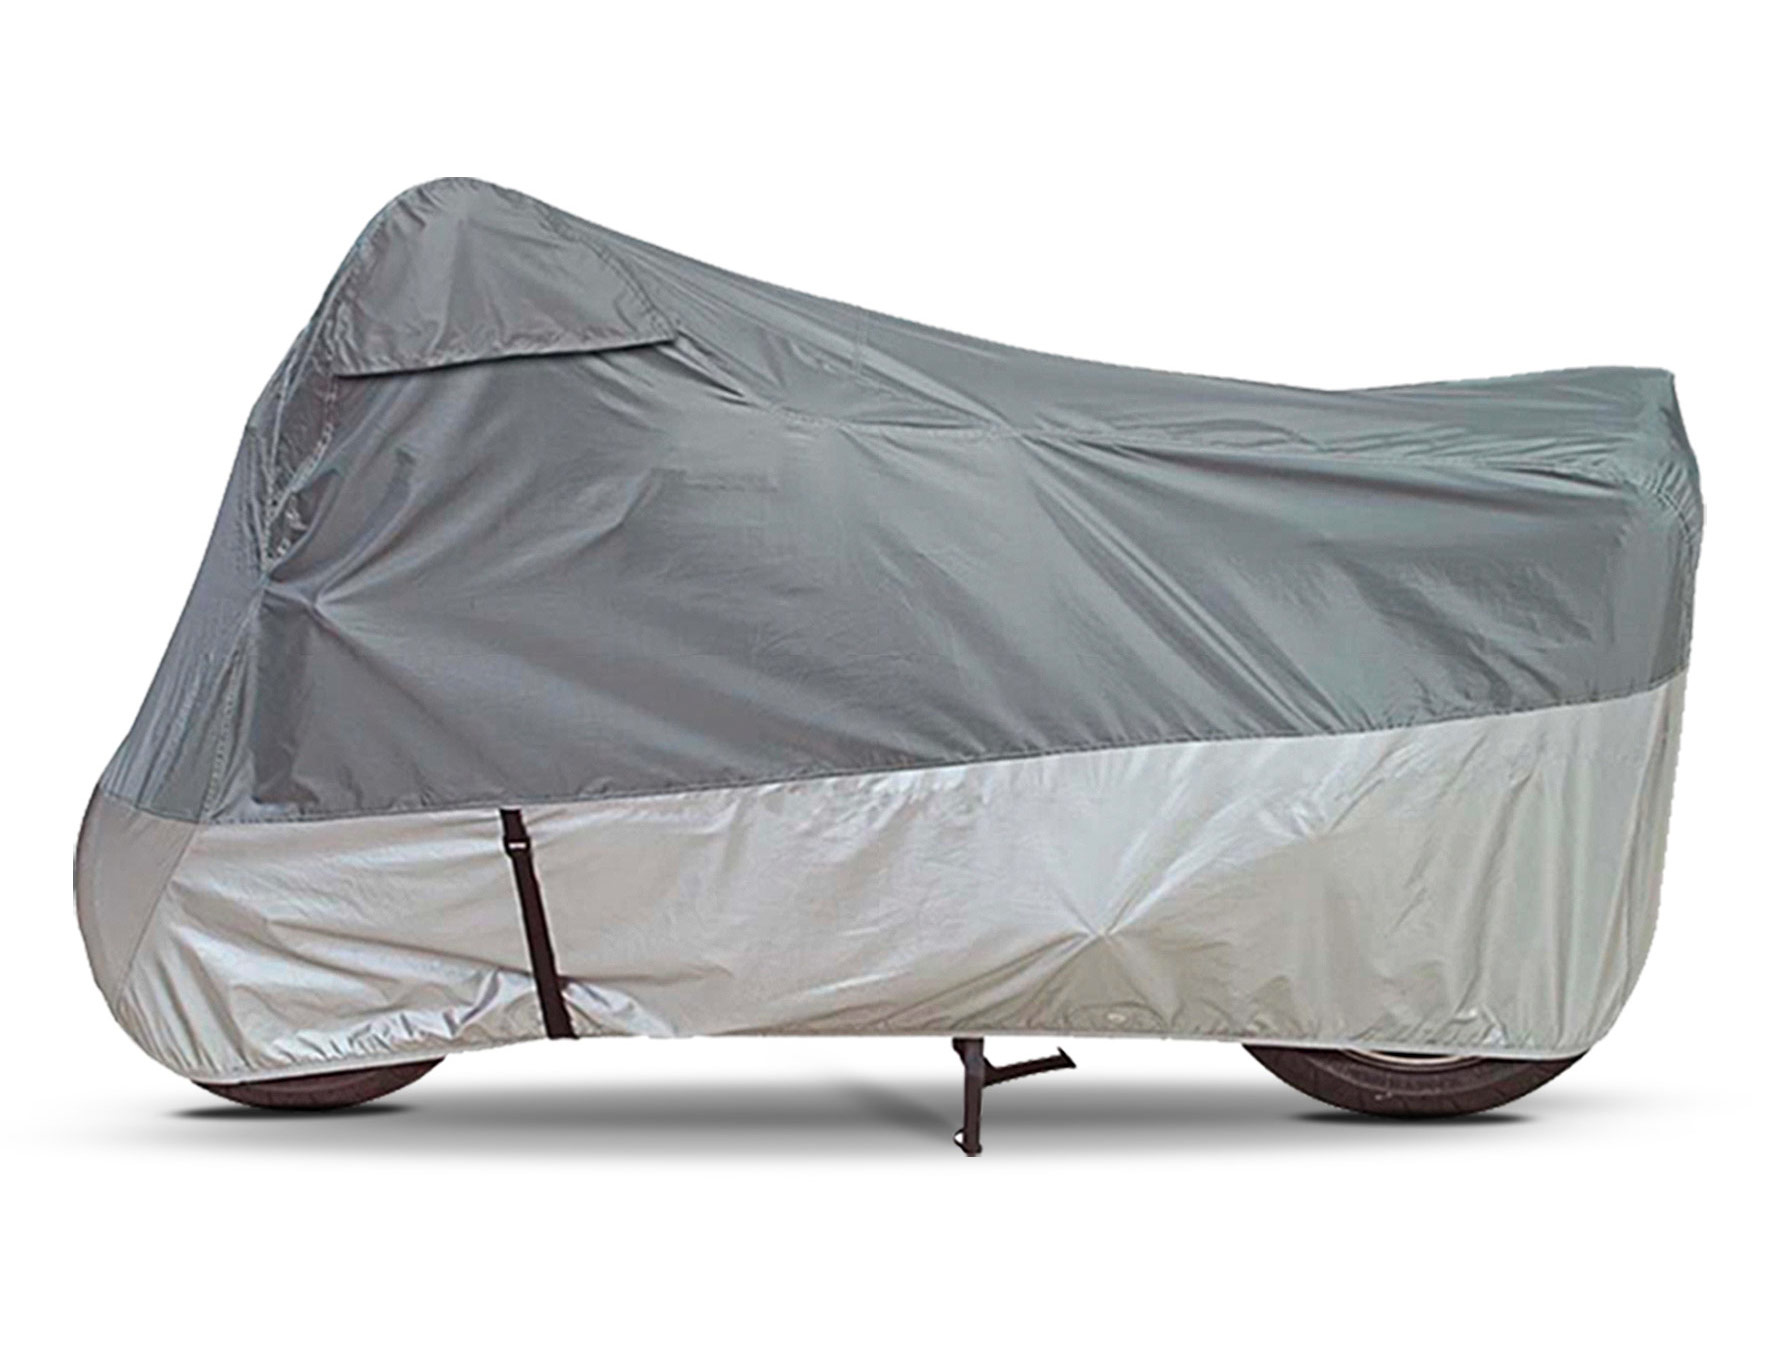 Dowco Guardian UltraLite Plus Lightweight Motorcycle Cover